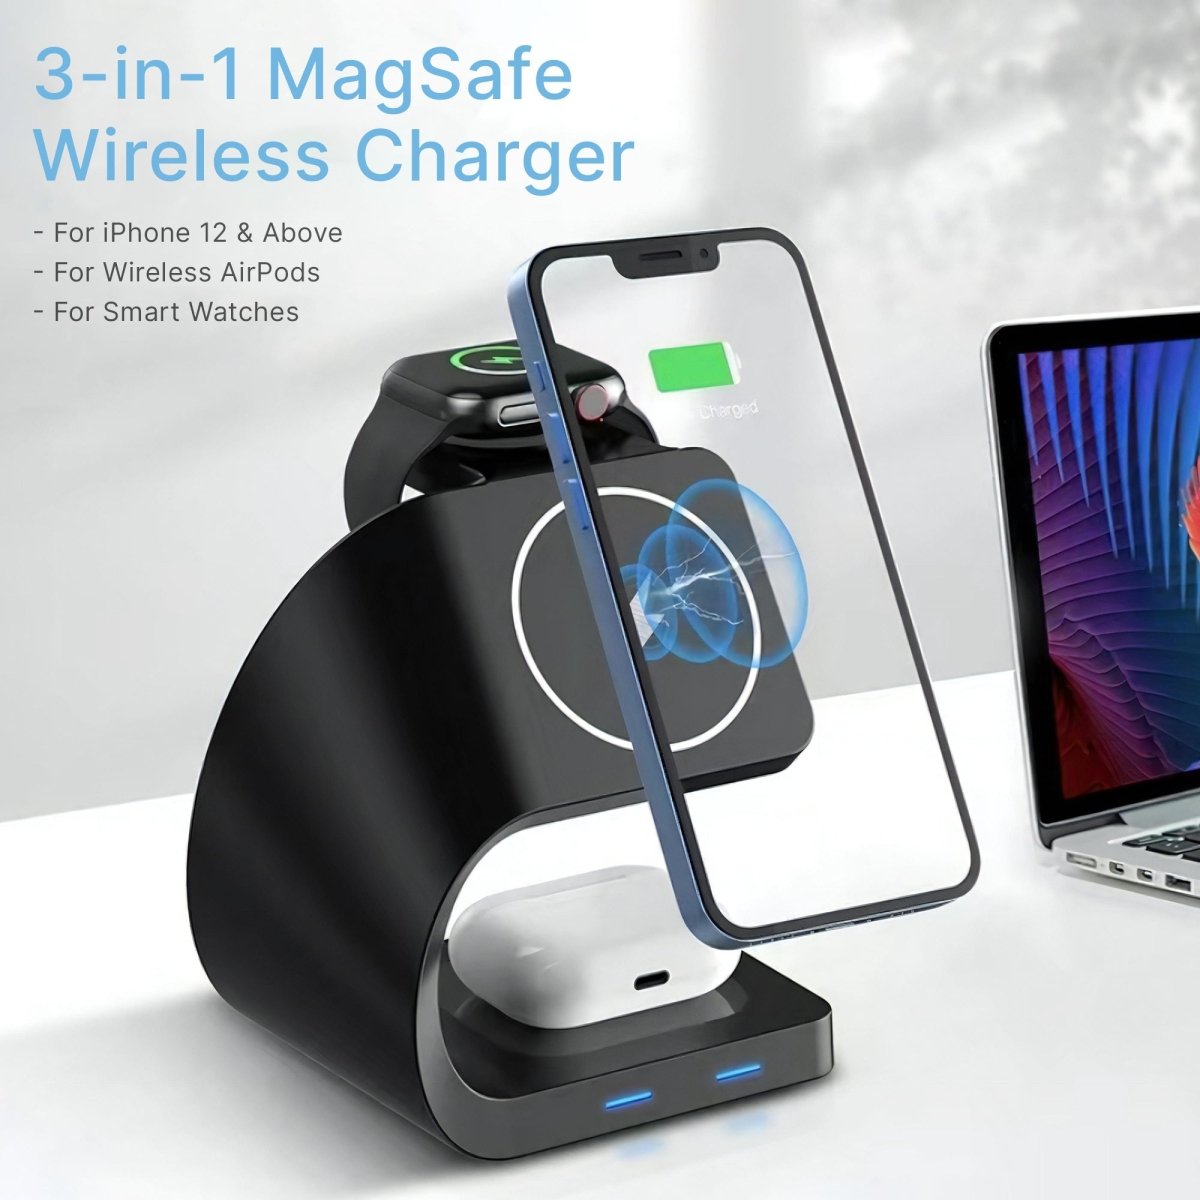 Galahad MagSafe 3 in 1 Wireless Charger for Phone, Apple Watch, & Airpods - RueZone Charger